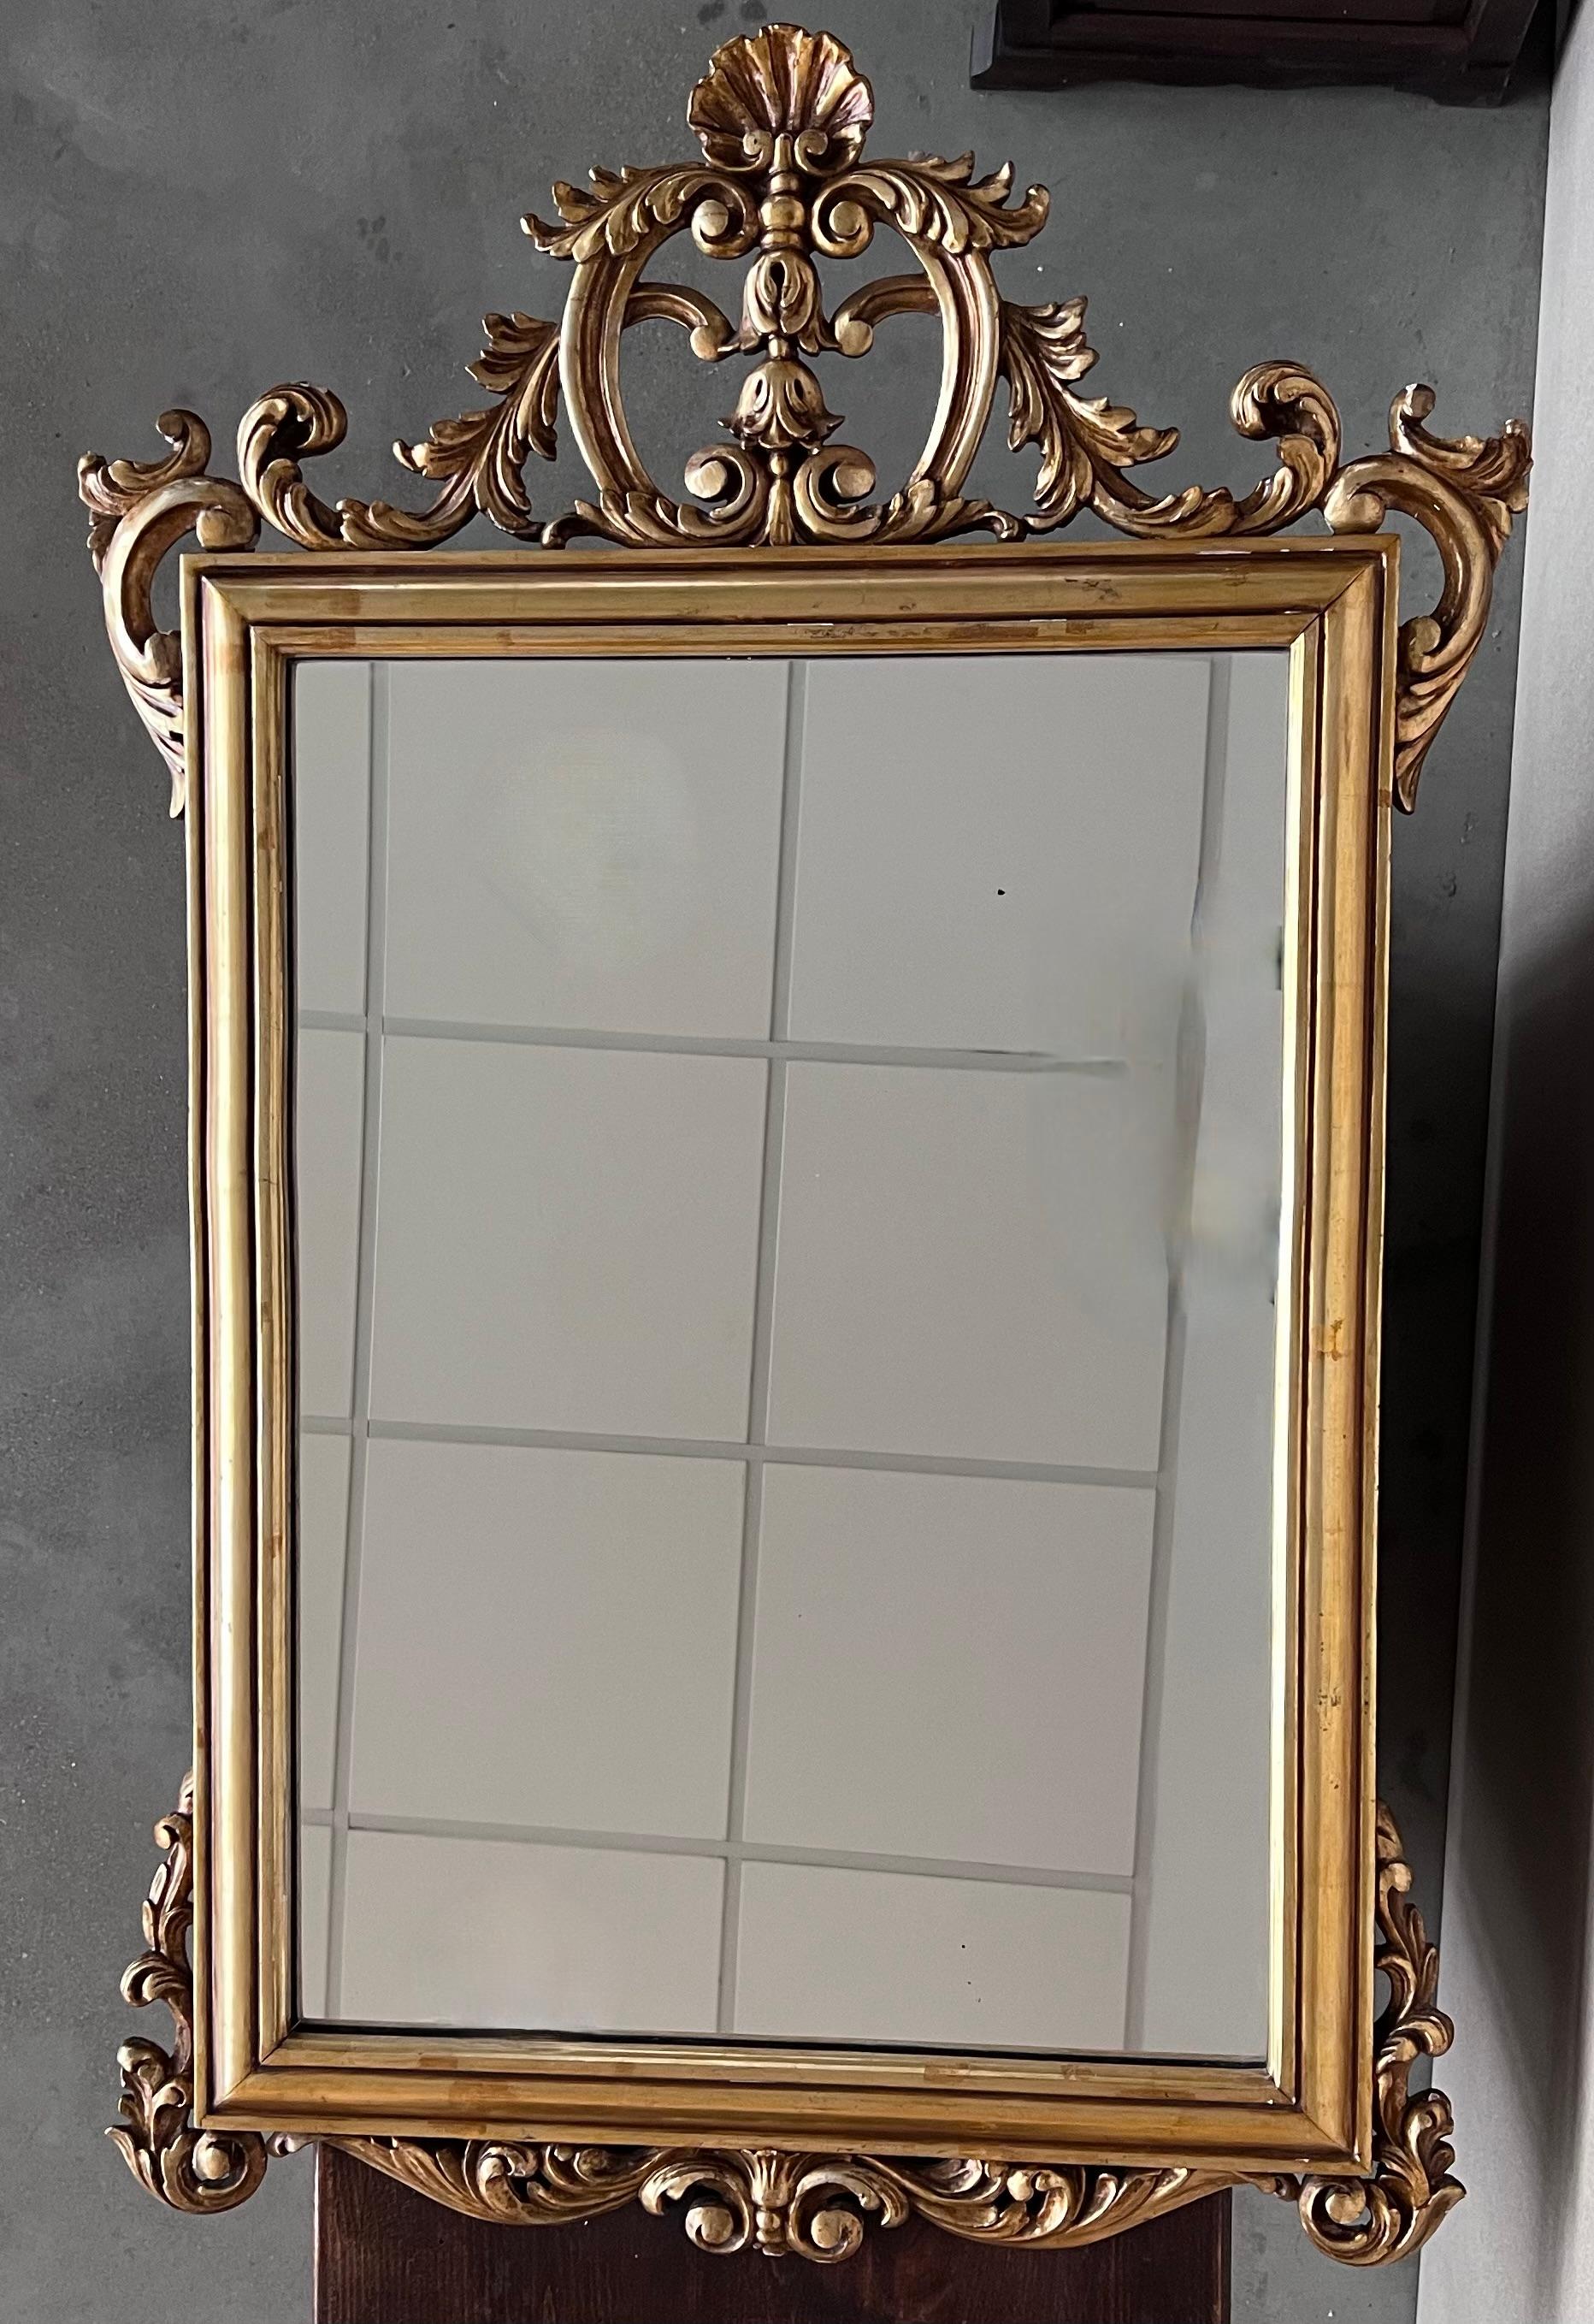 Regency 20th French Empire Period Carved Gilt Wood Rectangular Mirror with Crest For Sale